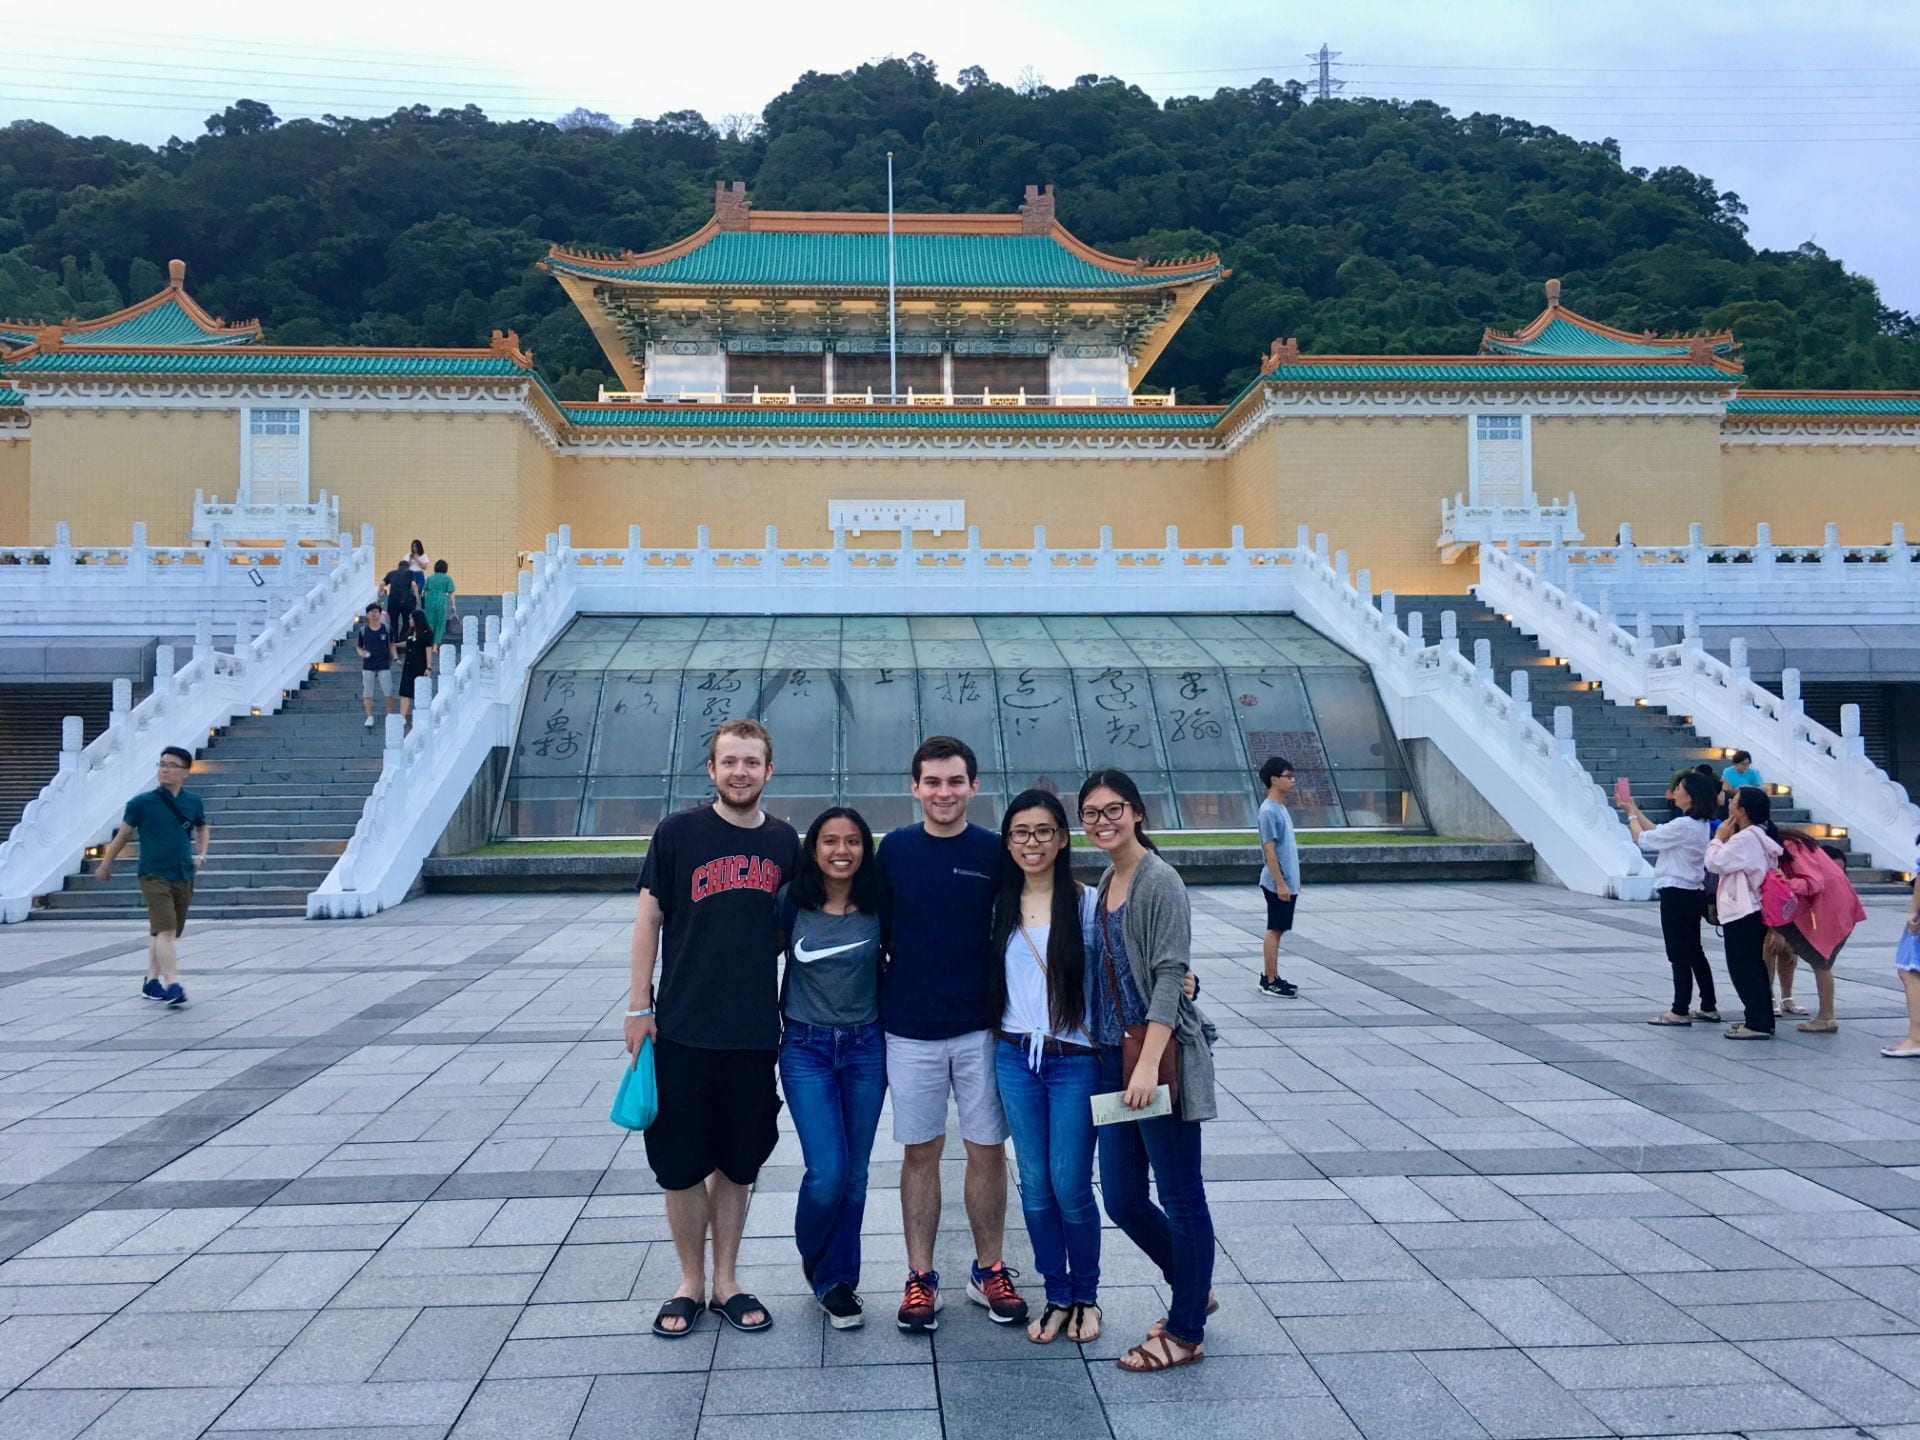 Five Sigur language students pose together in front of the National Taiwan Museum